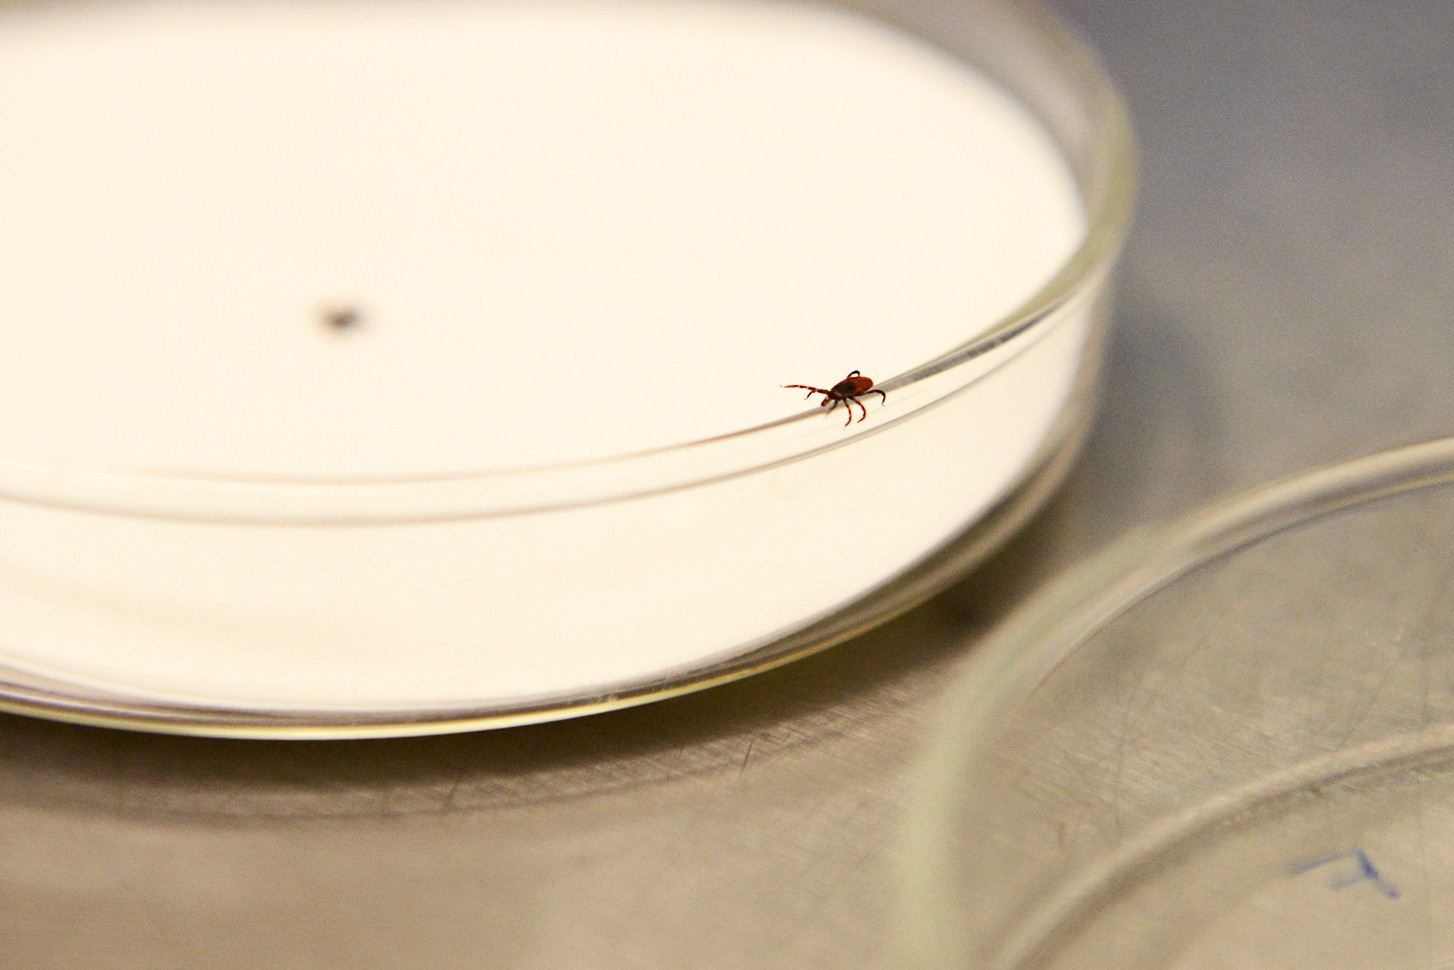 A blacklegged tick used in research on tick-borne pathogens at the University of Minnesota crawls across a petri dish in the Hodson Hall tick lab on Thursday, Jan. 28, 2016.